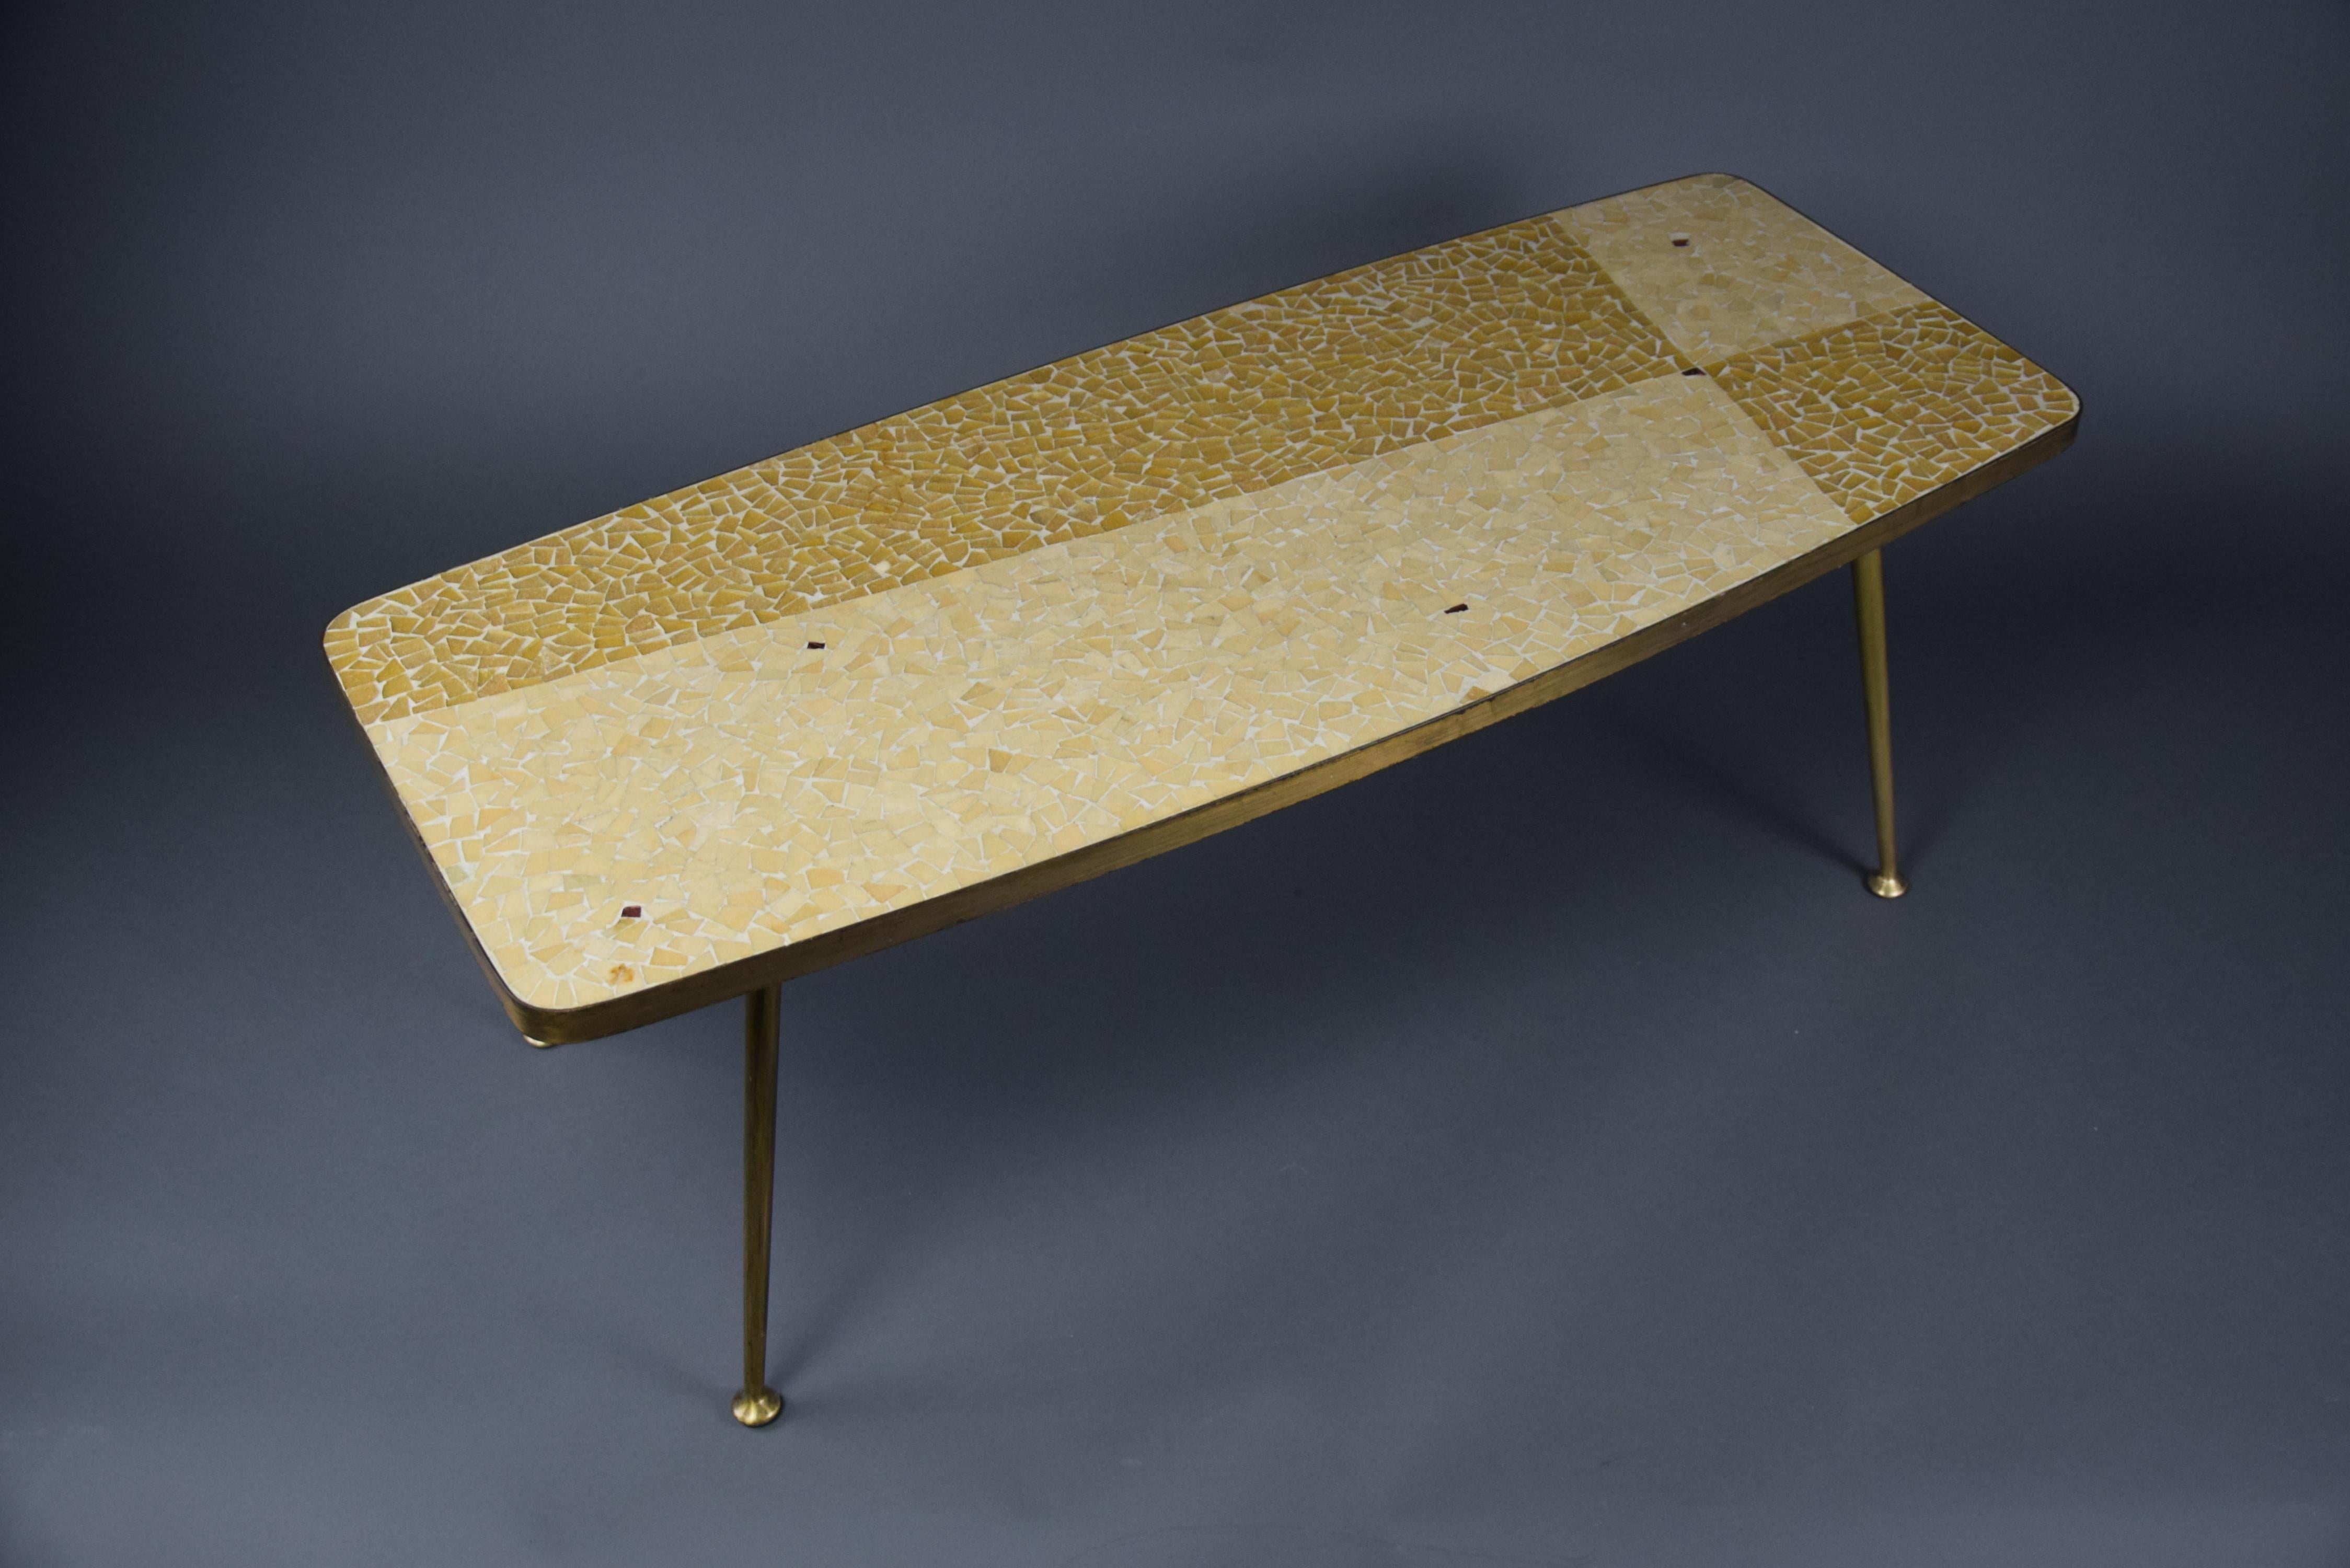 Allemand Table basse Berthold Muller Modernity Yellow and Sand Colored Mosaic en vente